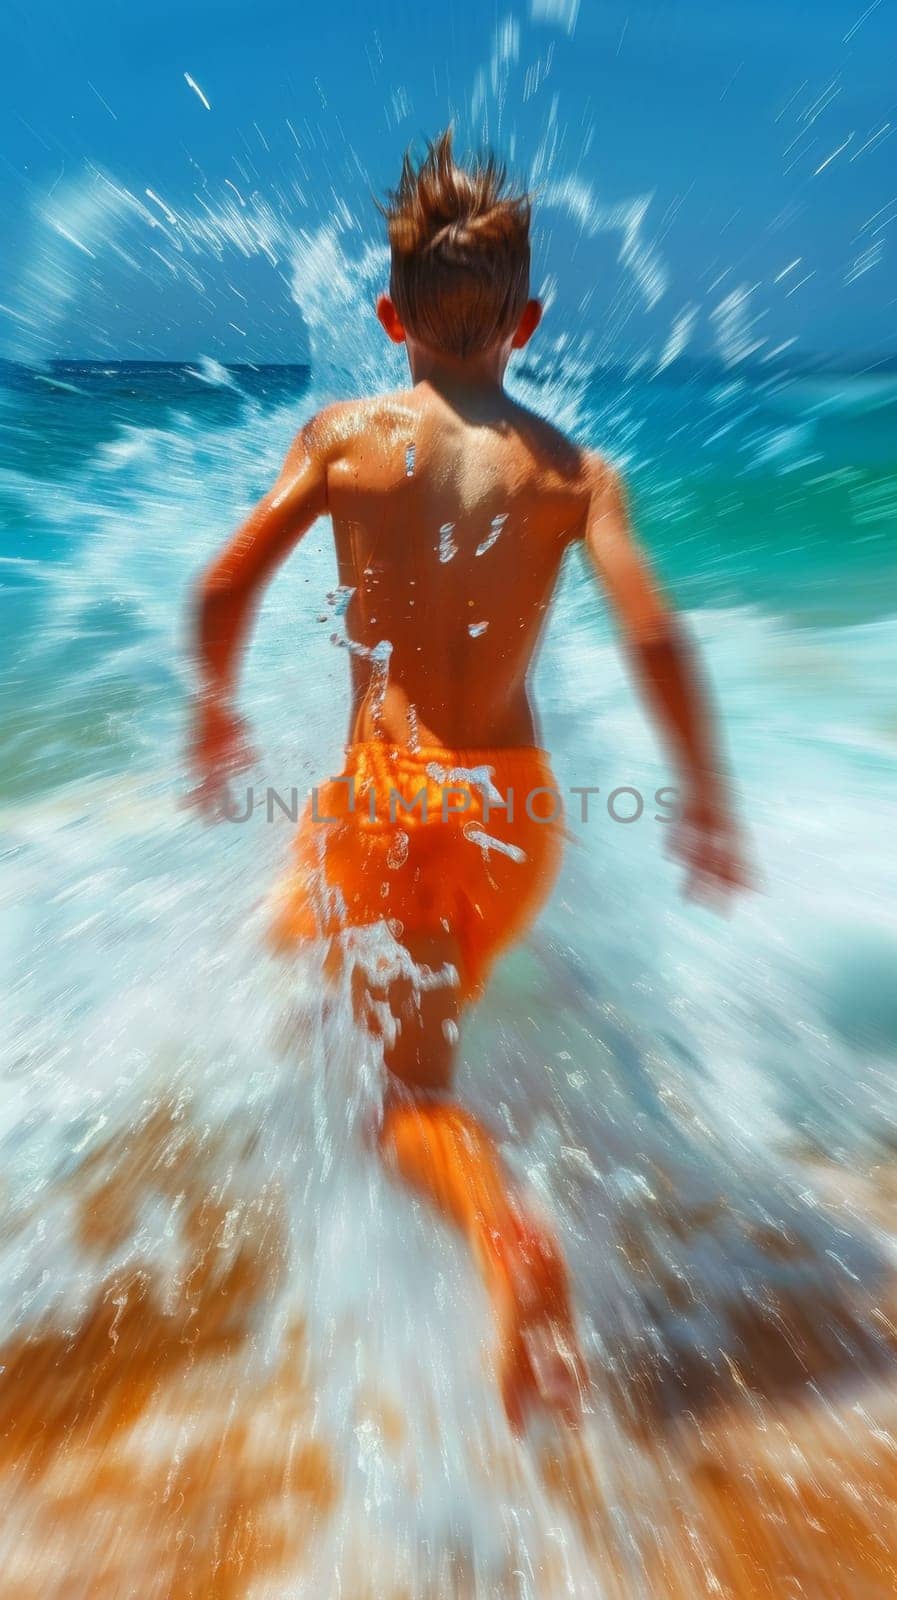 A boy in orange swimsuit running through the water at a beach